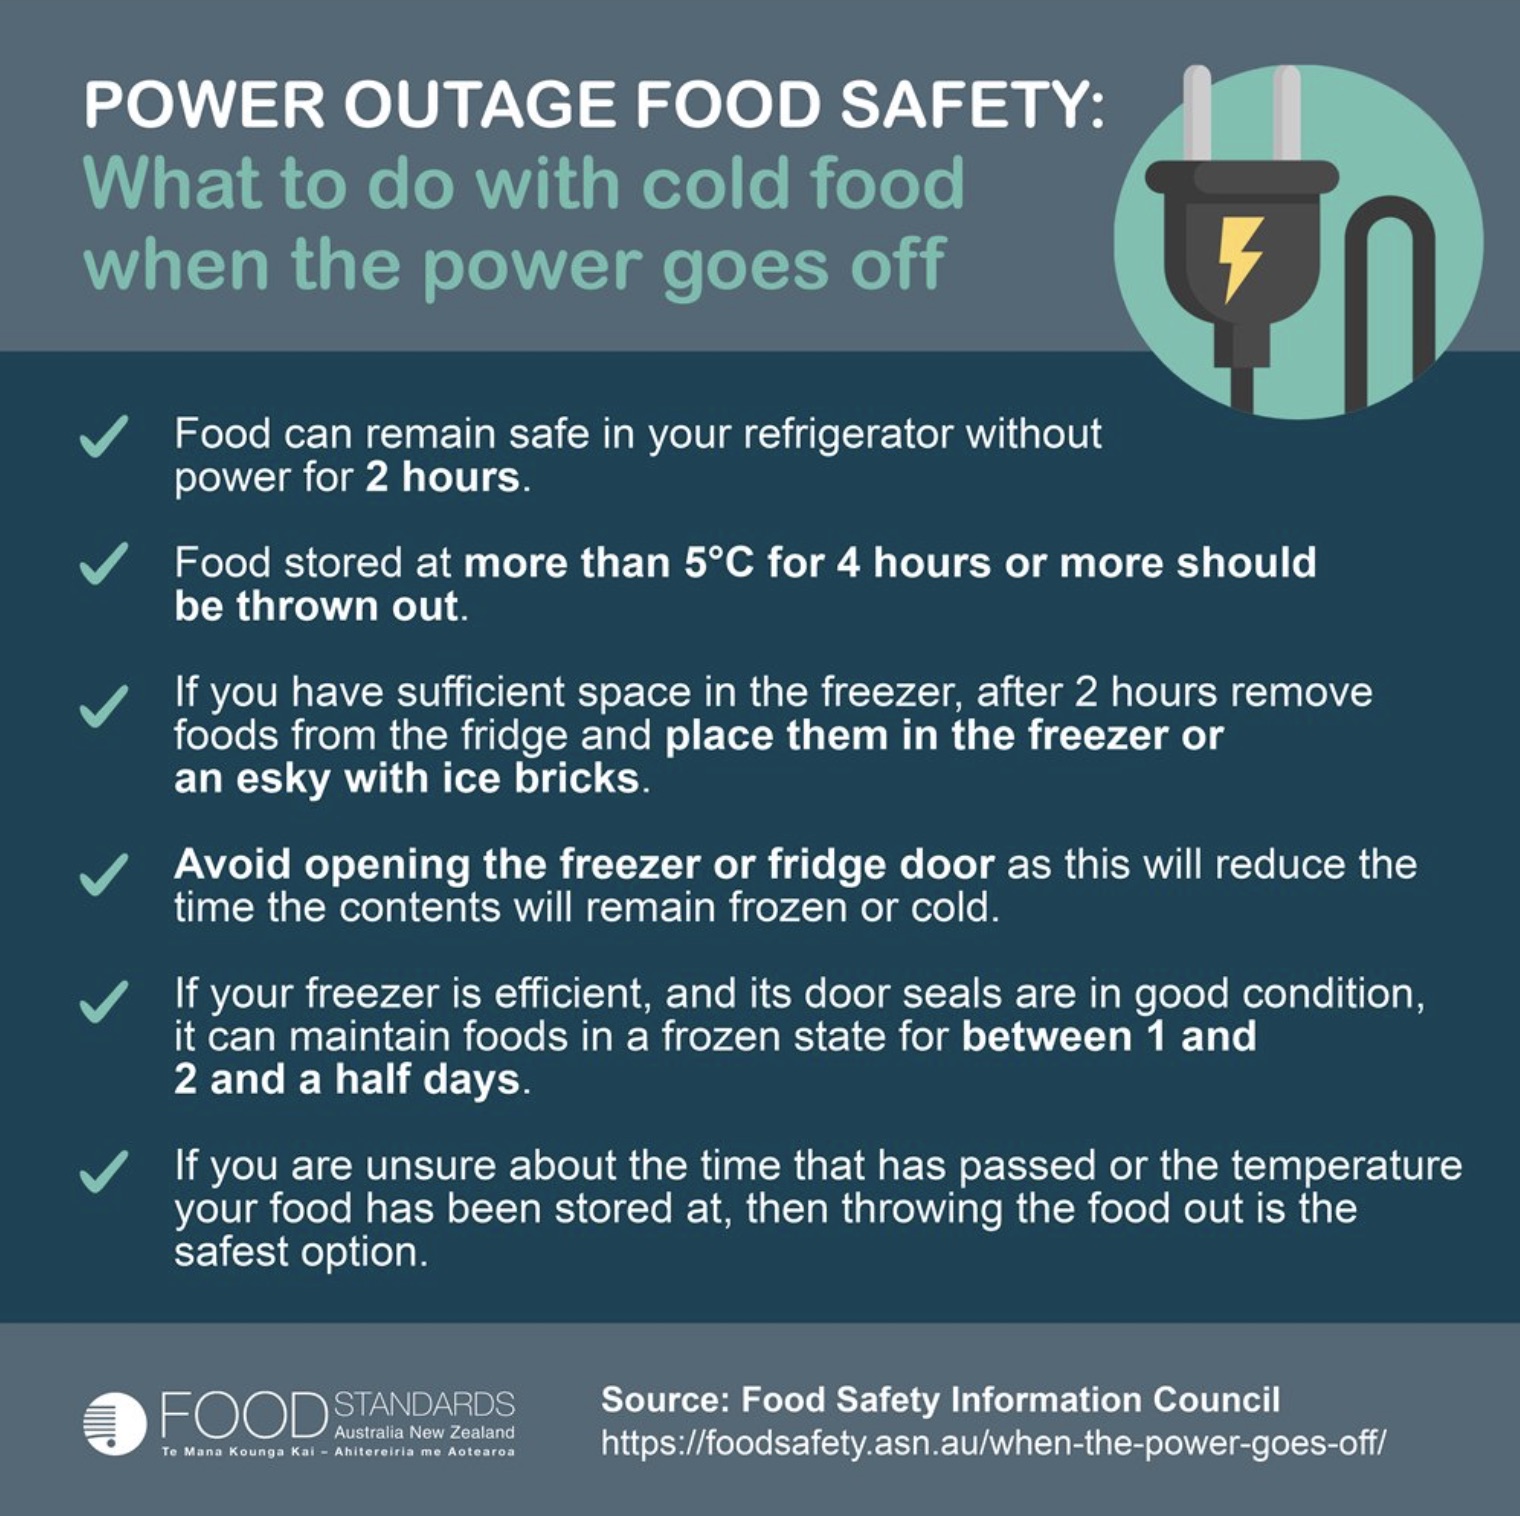 https://www.foodsafety.asn.au/wp-content/uploads/2020/01/Power-outage.jpg